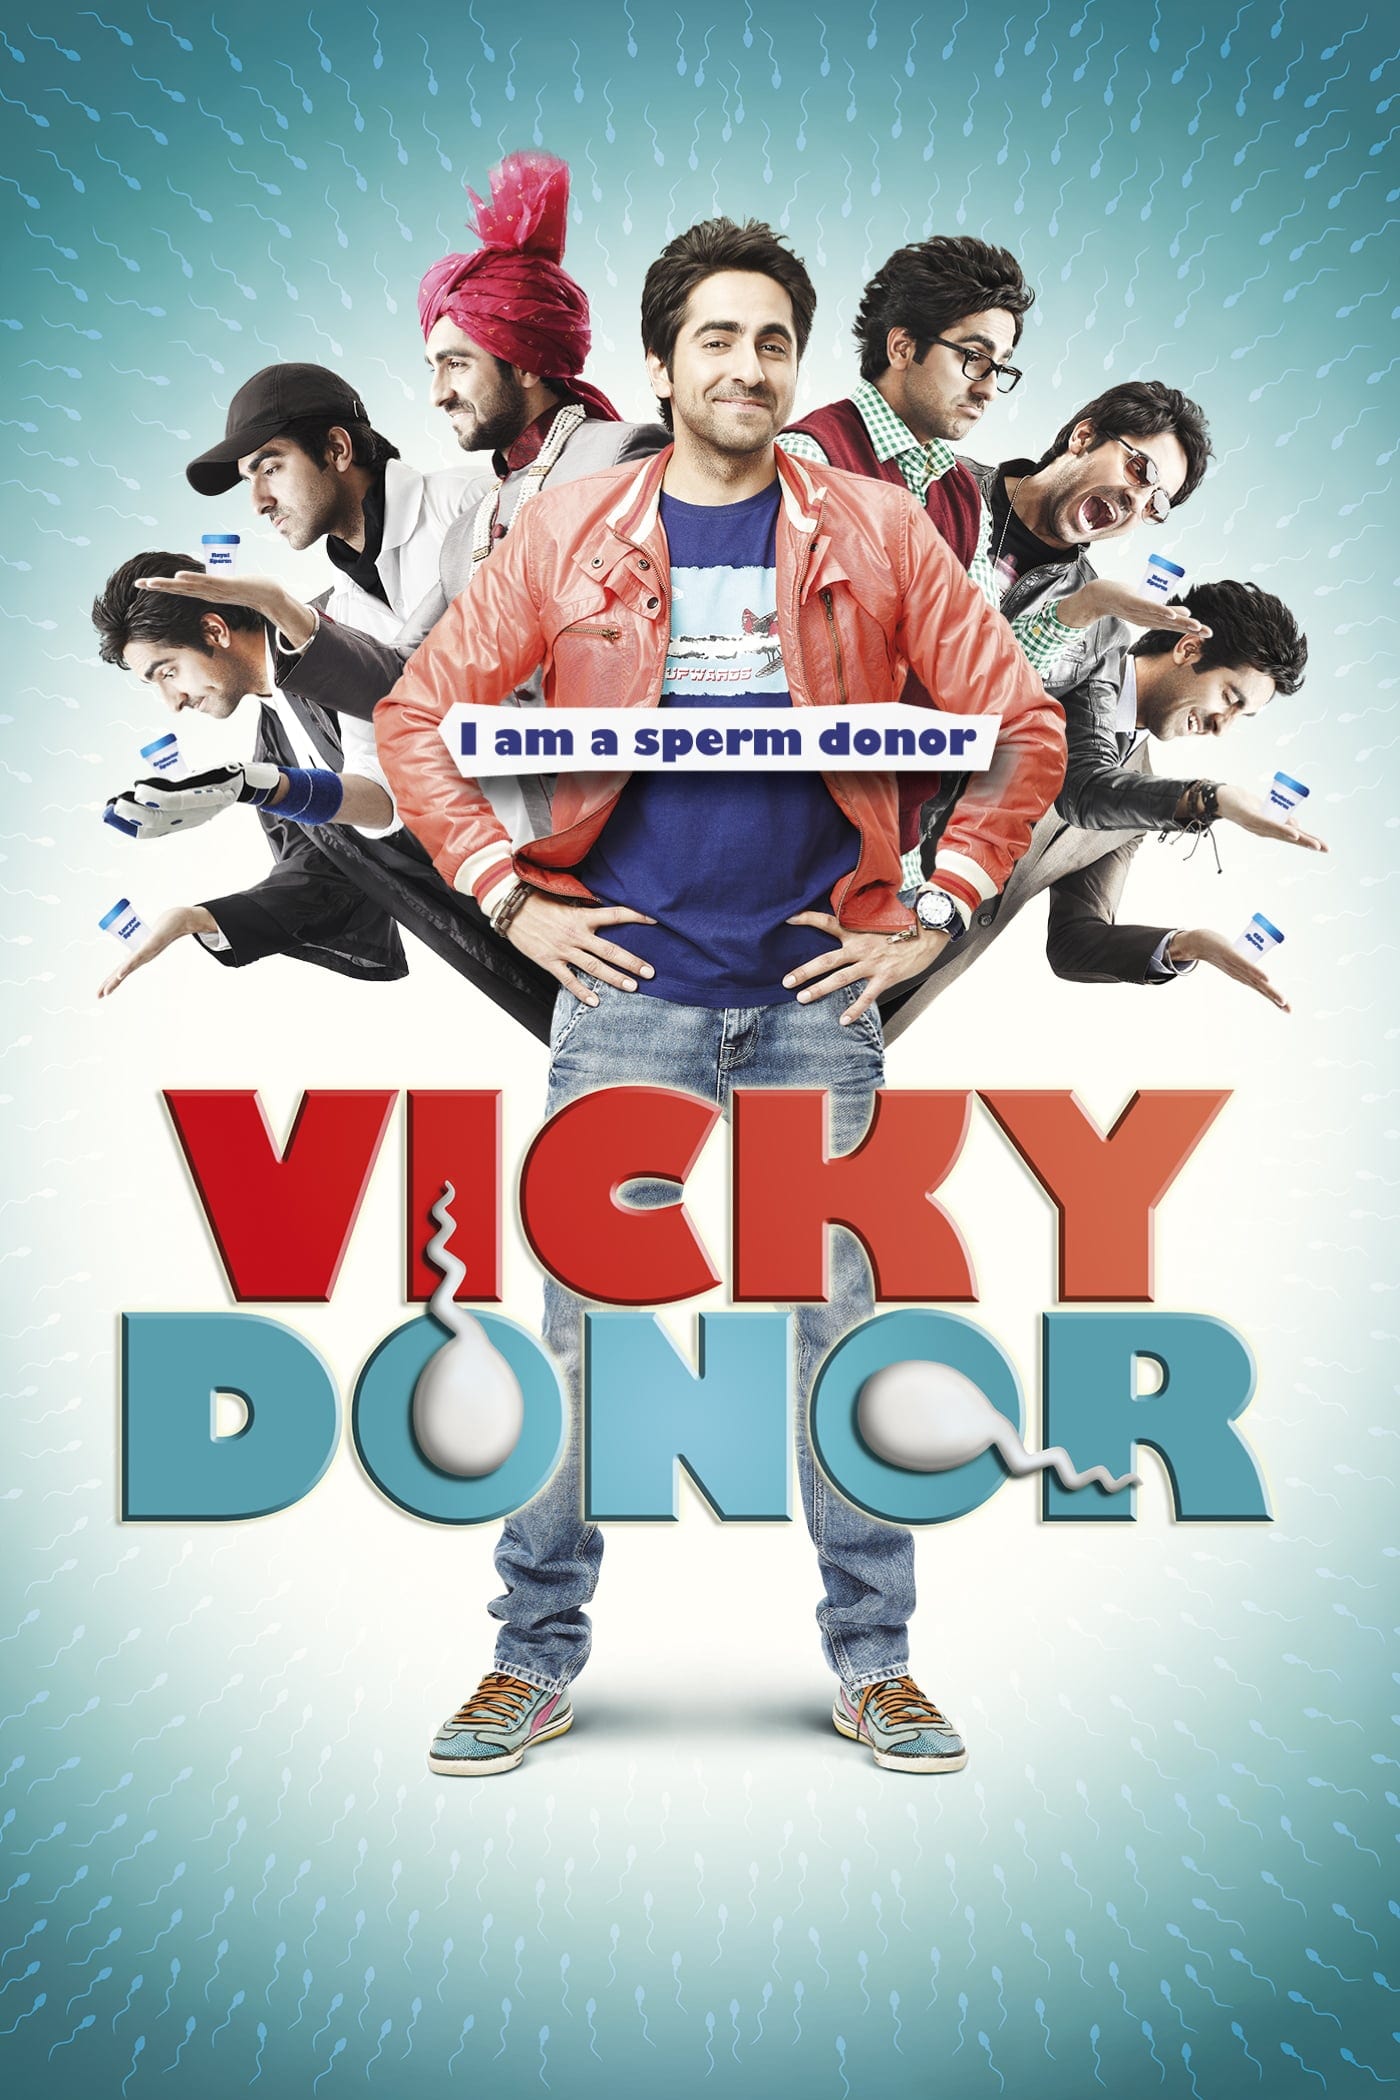 Poster for the movie "Vicky Donor"